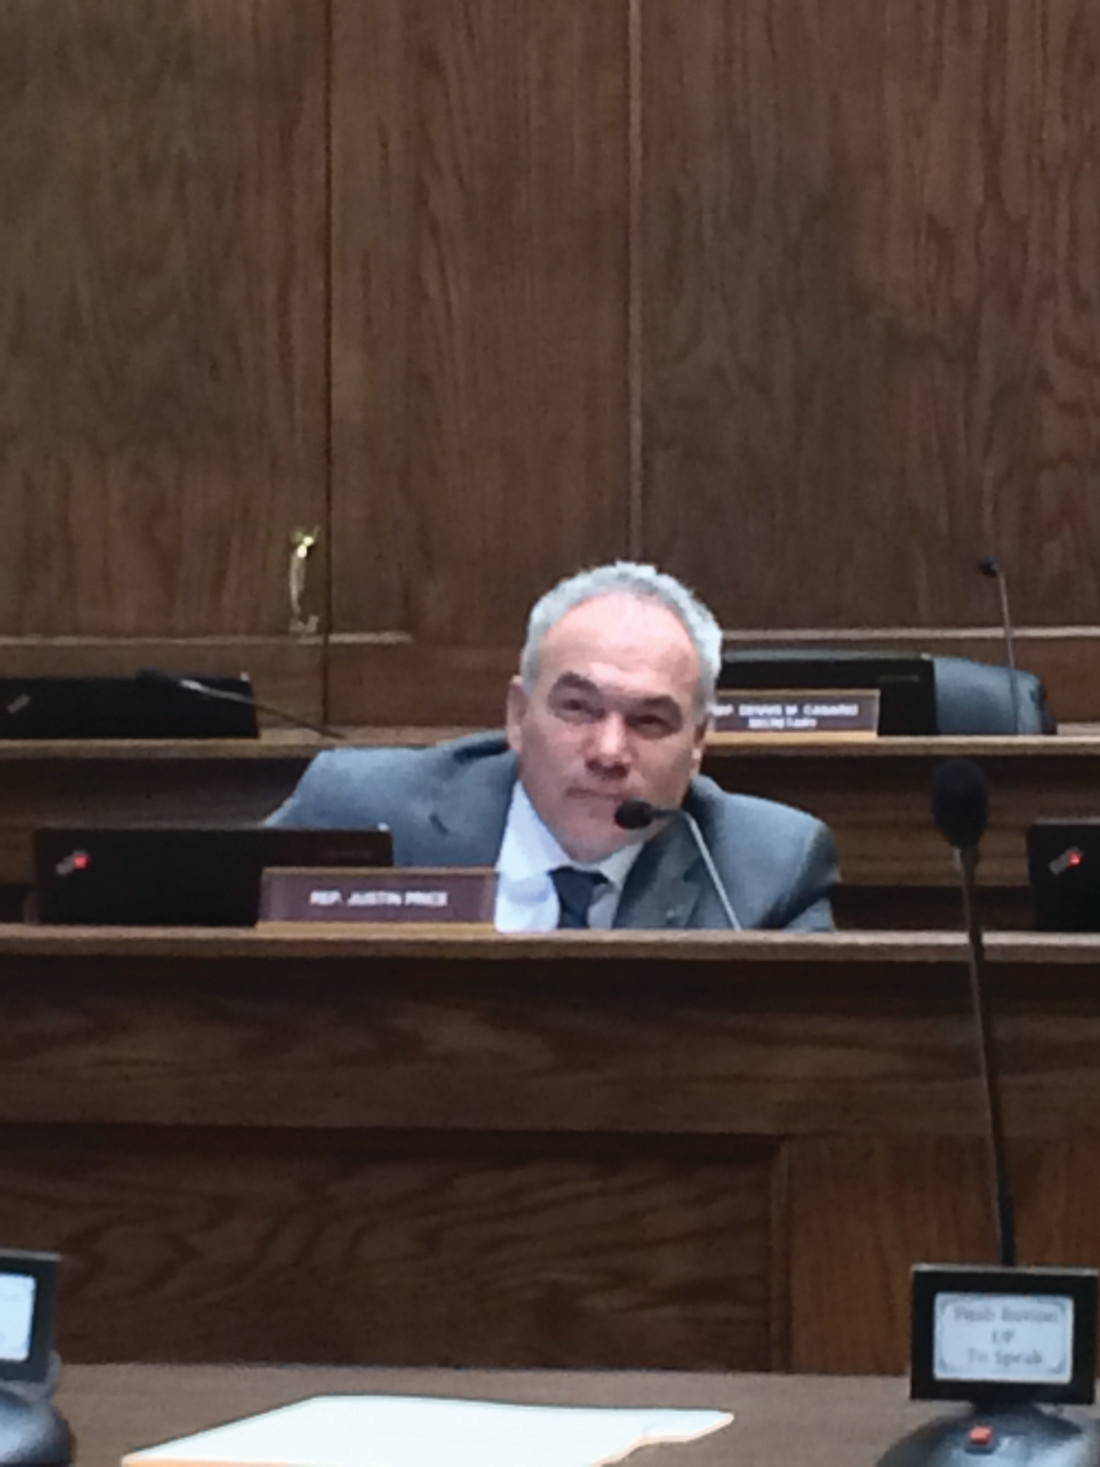 PRICE: representative Justin Price introduced legislation that were heard at the House Committee on Health Education and Welfare. He said he believes that parents have the right to what immunizations children have when they are for non-communicable diseases.